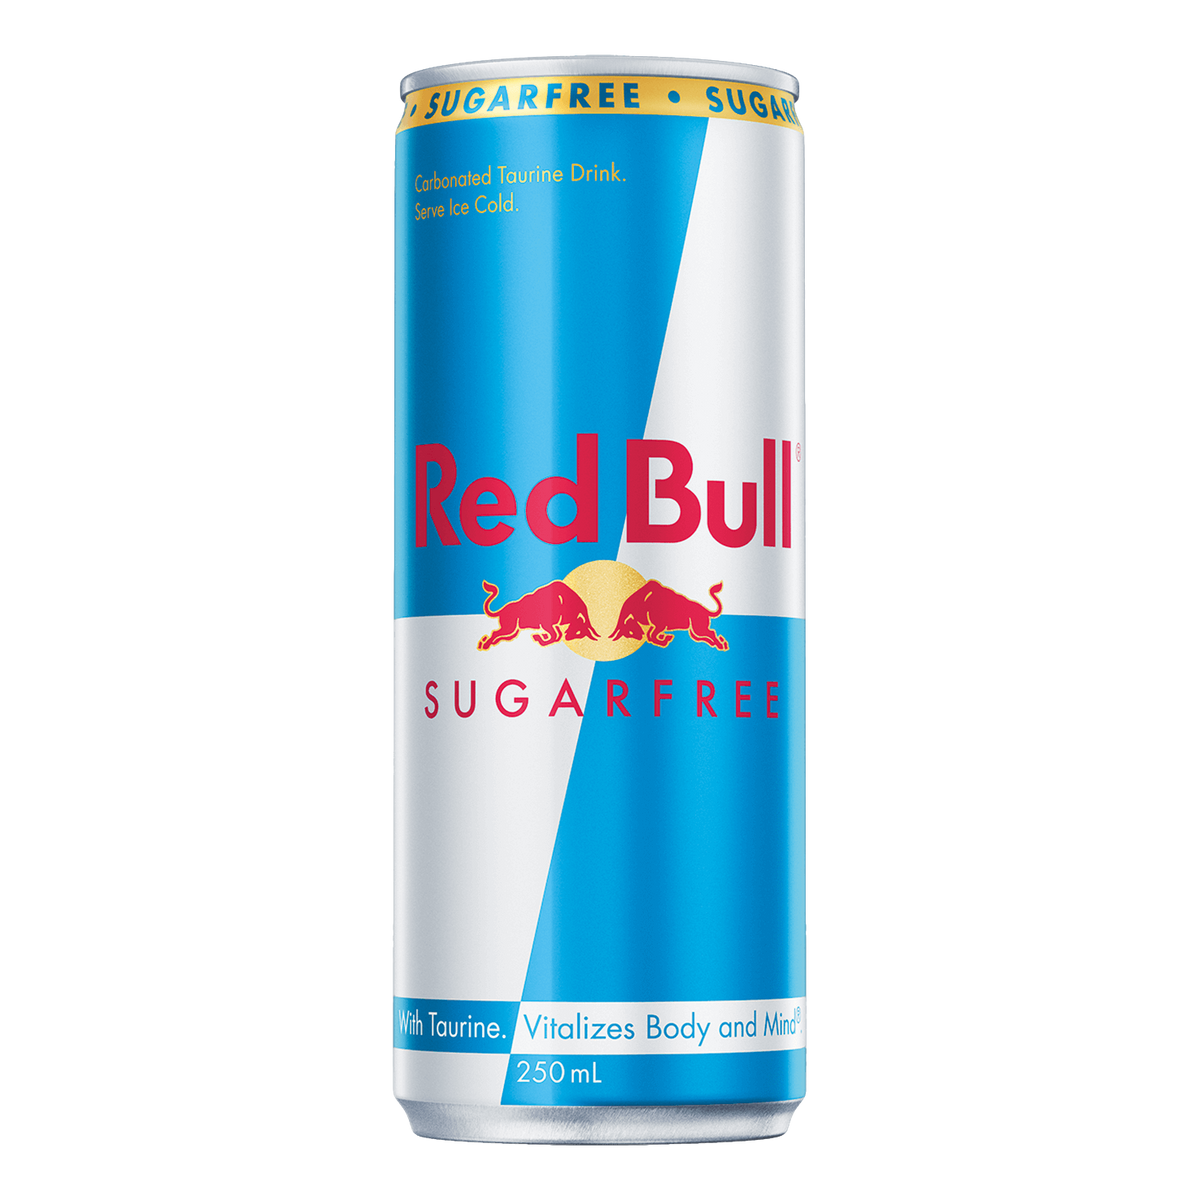 Red Bull Energy Drink Sugar Free 250ml Can 4 Pack